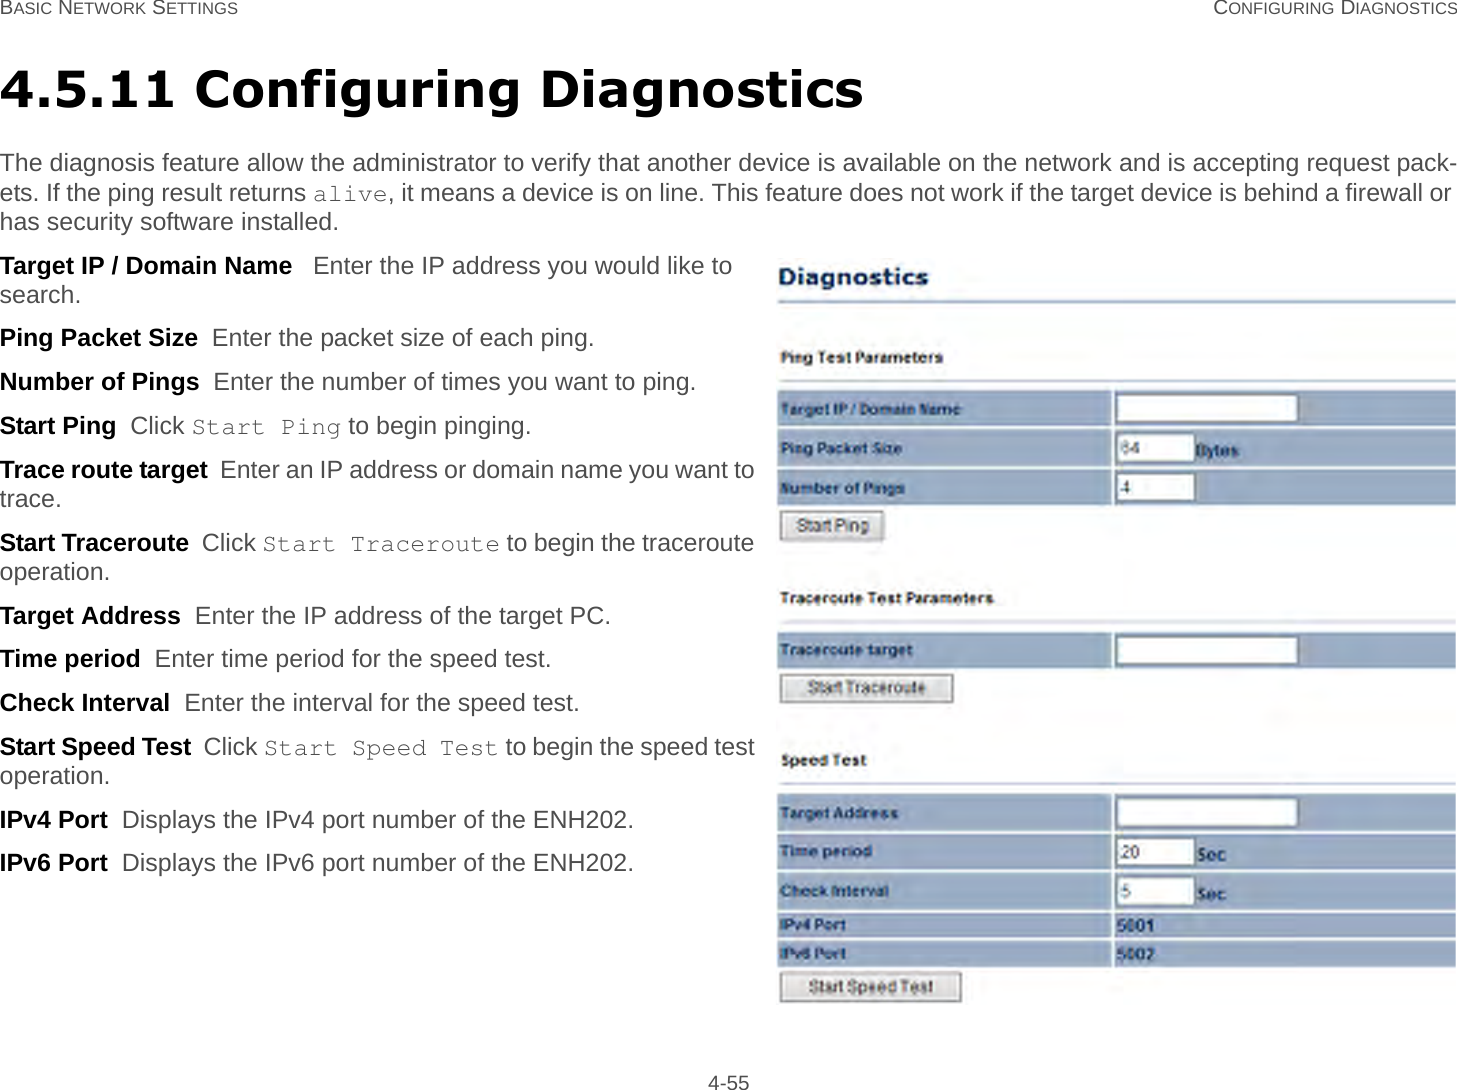 BASIC NETWORK SETTINGS CONFIGURING DIAGNOSTICS 4-554.5.11 Configuring DiagnosticsThe diagnosis feature allow the administrator to verify that another device is available on the network and is accepting request pack-ets. If the ping result returns alive, it means a device is on line. This feature does not work if the target device is behind a firewall or has security software installed.Target IP / Domain Name   Enter the IP address you would like to search.Ping Packet Size  Enter the packet size of each ping.Number of Pings  Enter the number of times you want to ping.Start Ping  Click Start Ping to begin pinging.Trace route target  Enter an IP address or domain name you want to trace.Start Traceroute  Click Start Traceroute to begin the traceroute operation.Target Address  Enter the IP address of the target PC.Time period  Enter time period for the speed test.Check Interval  Enter the interval for the speed test.Start Speed Test  Click Start Speed Test to begin the speed test operation.IPv4 Port  Displays the IPv4 port number of the ENH202.IPv6 Port  Displays the IPv6 port number of the ENH202.